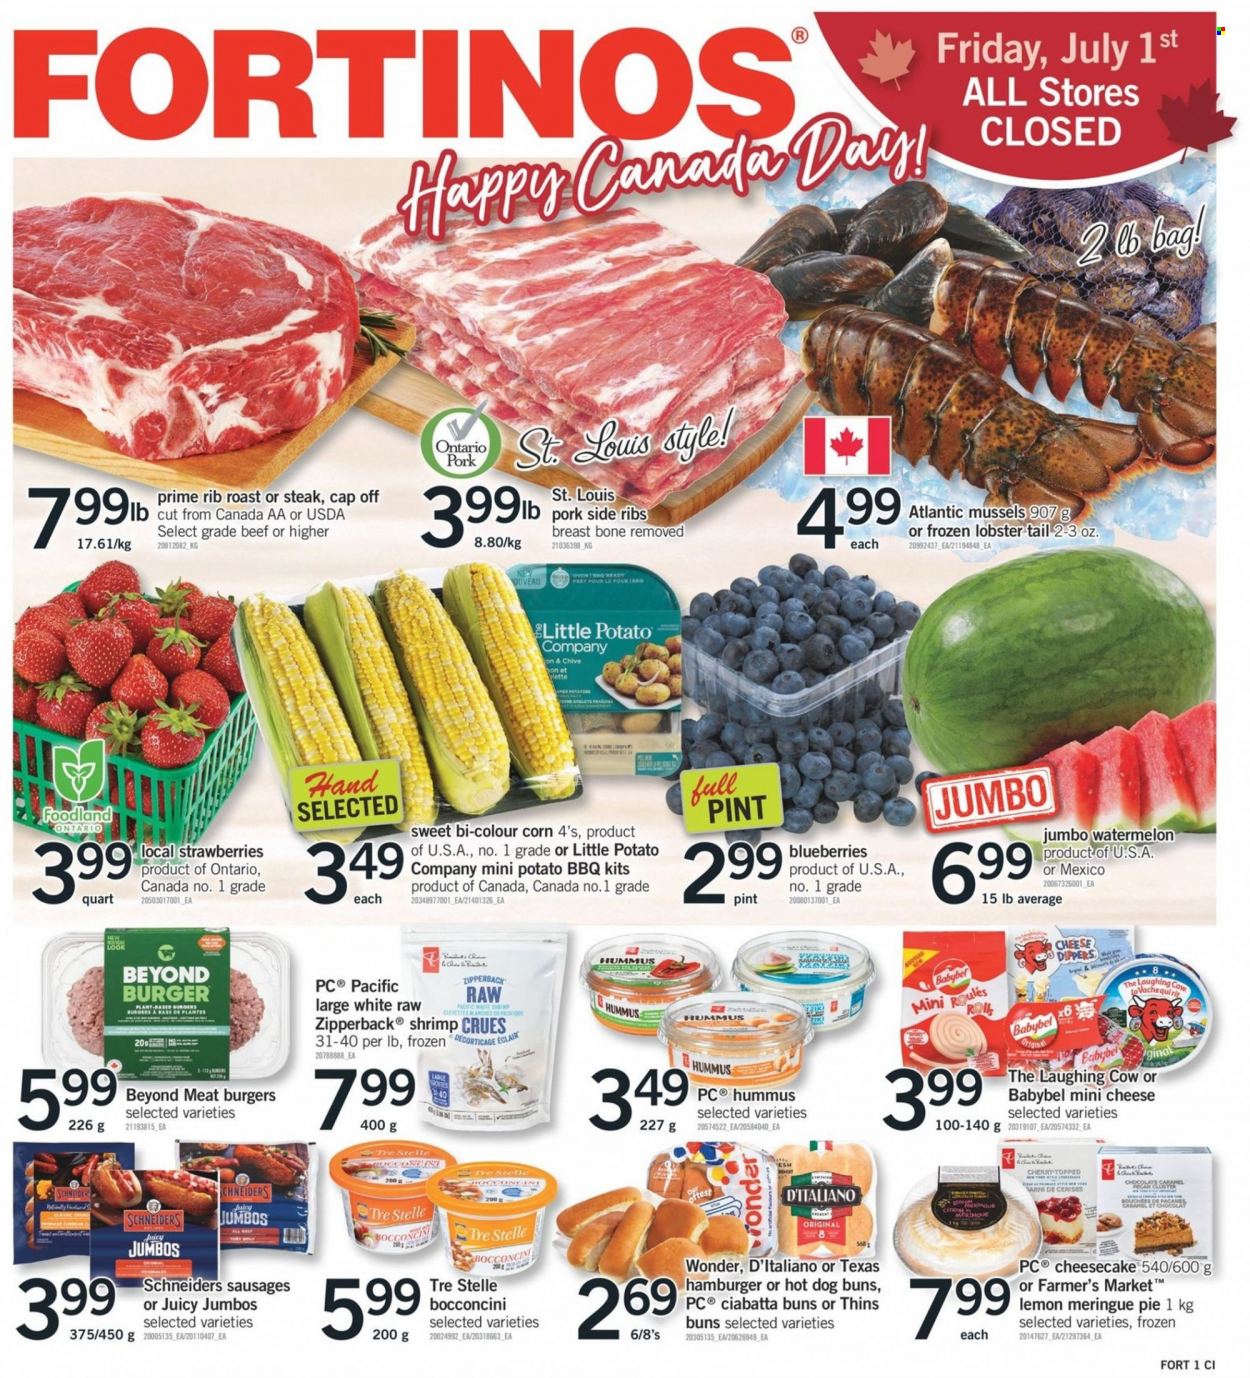 thumbnail - Fortinos Flyer - June 30, 2022 - July 06, 2022 - Sales products - pie, buns, cheesecake, corn, blueberries, strawberries, watermelon, cherries, lobster, mussels, lobster tail, shrimps, sausage, hummus, bocconcini, cheese, The Laughing Cow, Babybel, chocolate, Thins, caramel, cap, ciabatta, steak. Page 1.